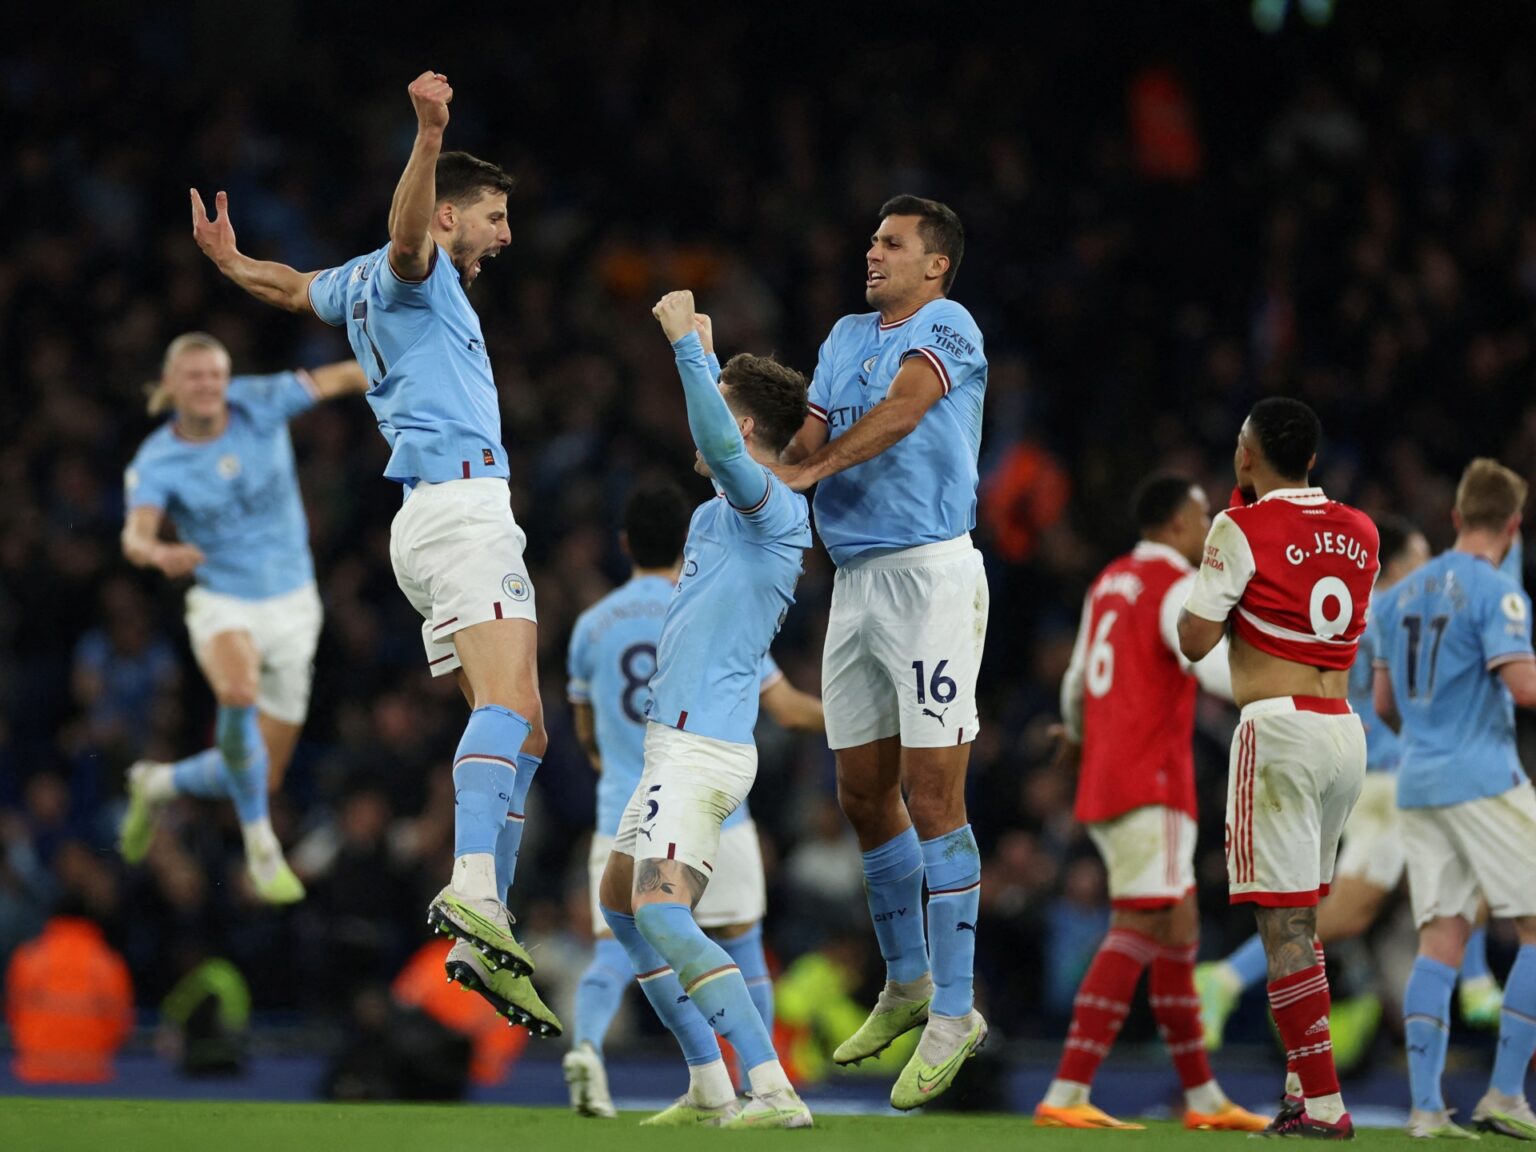 Manchester City beat Arsenal 4-1 in the Premier League